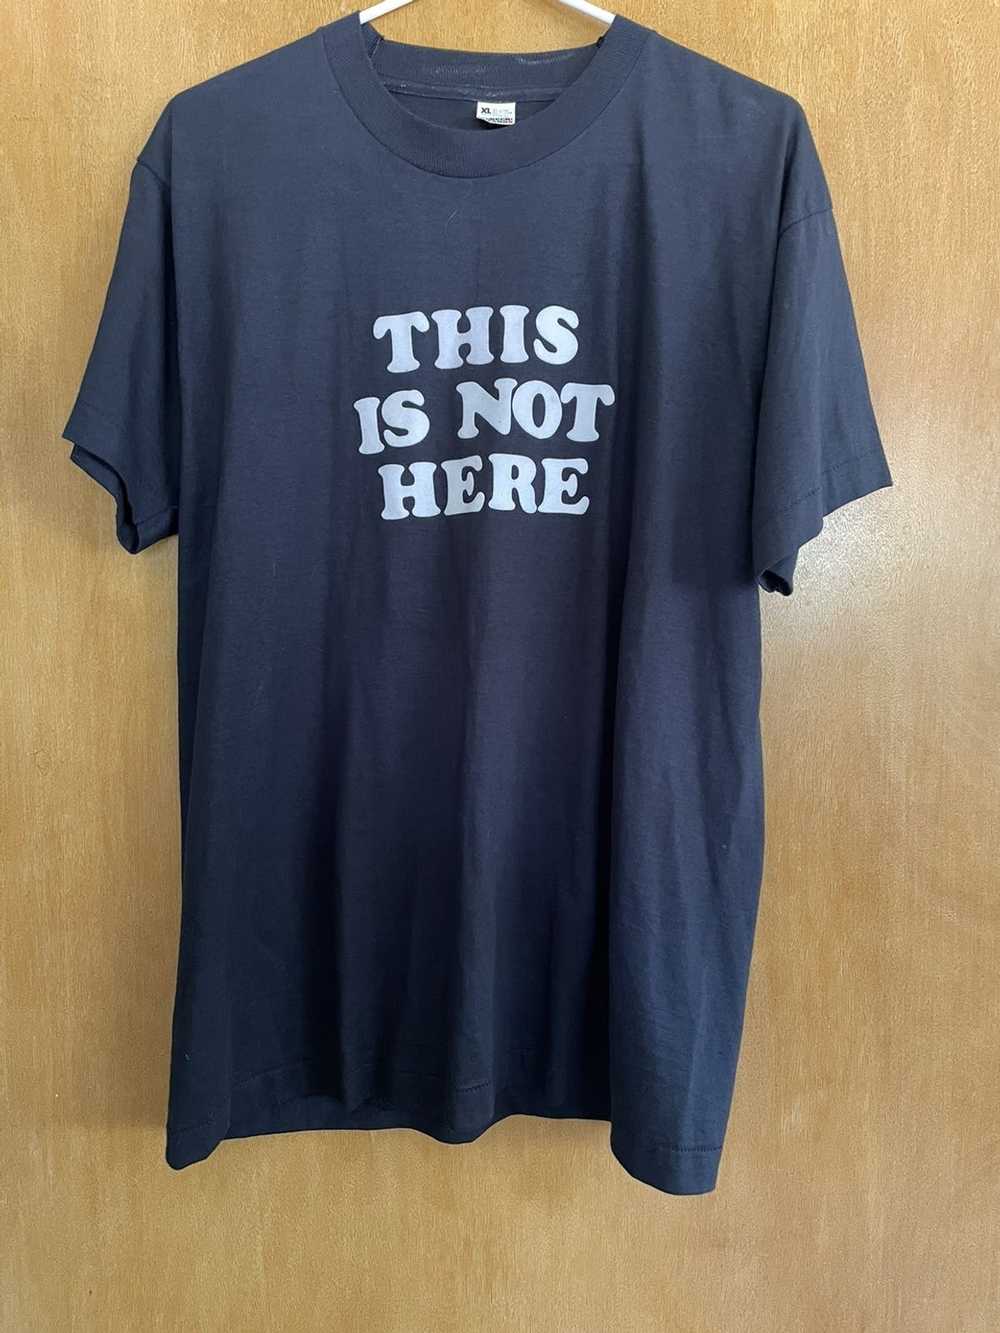 Vintage Vintage John Lennon “THIS IS NOT HERE” - image 1